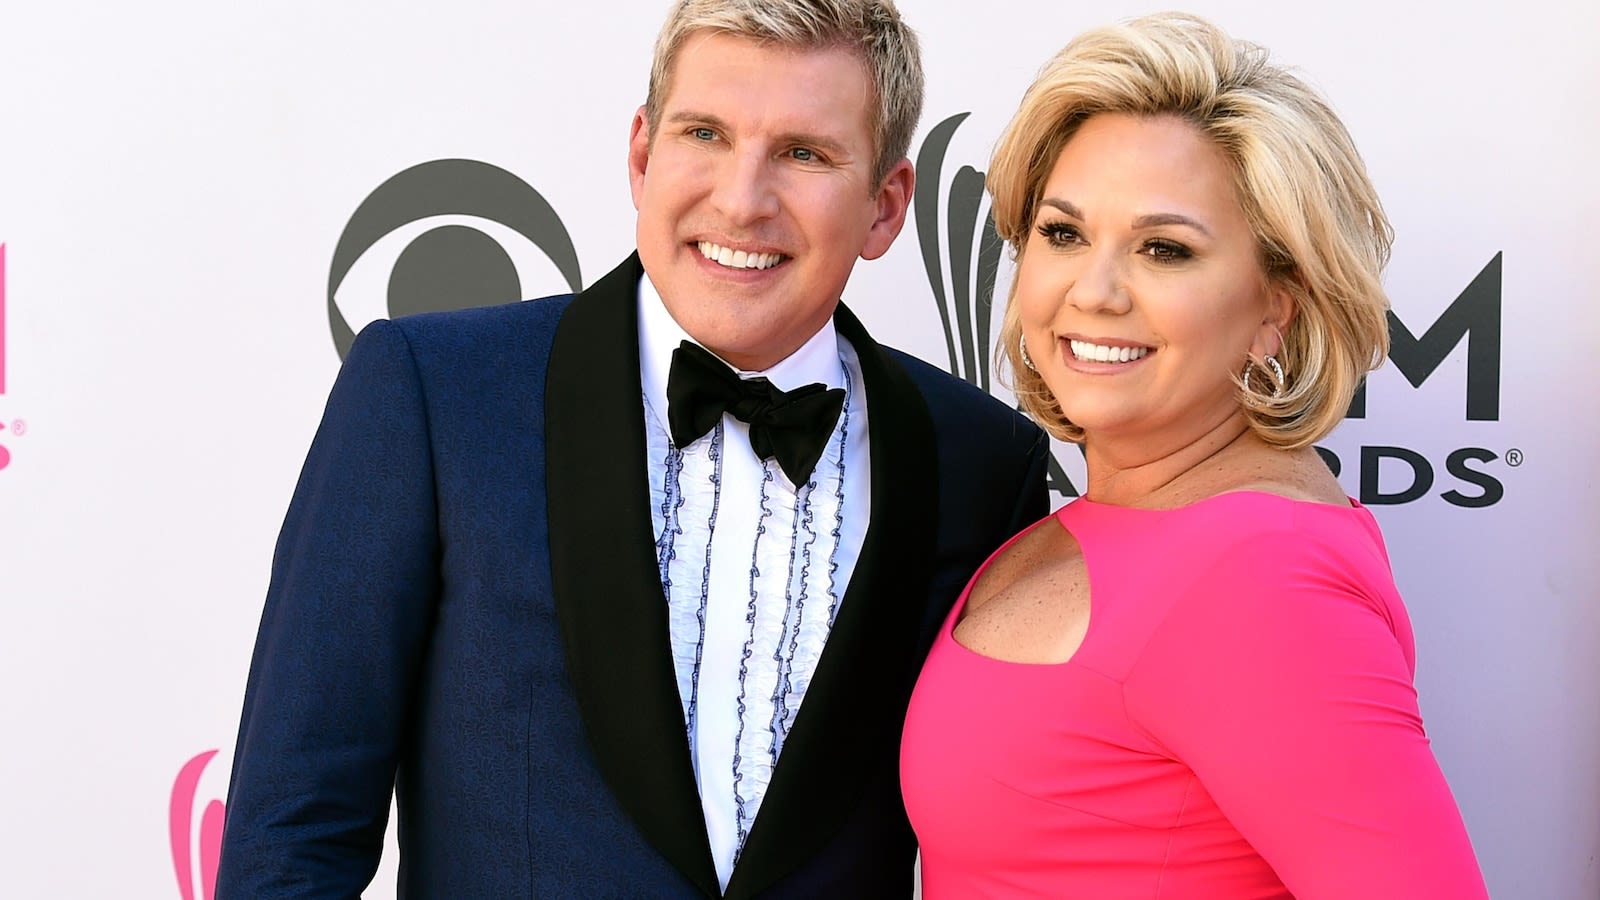 Reality TV's Julie Chrisley must be resentenced in bank fraud, tax evasion case, appeals judges rule